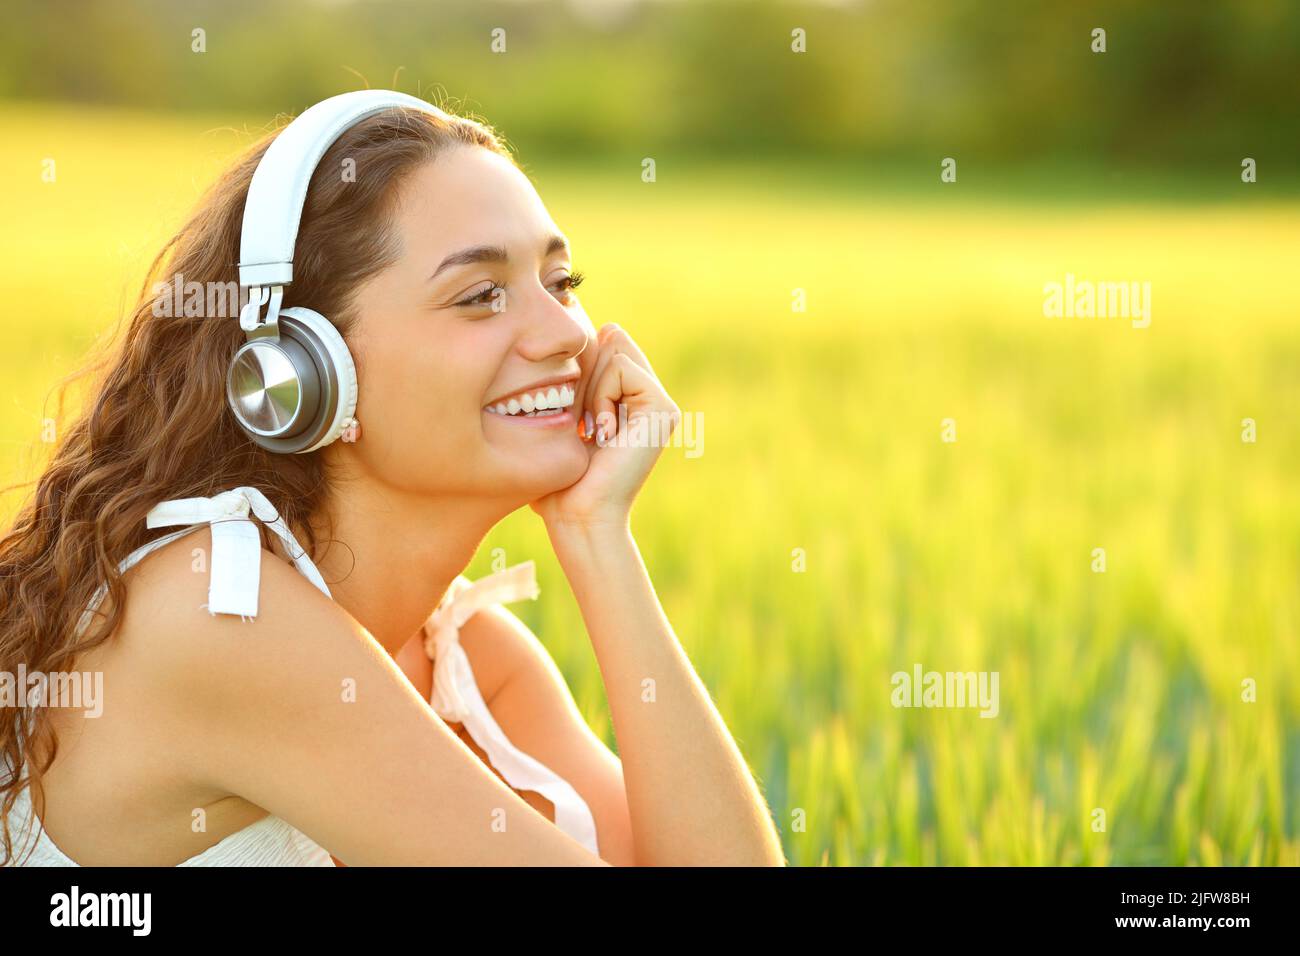 Happy woman listening to music with wireless headphones sitting in a wheat field Stock Photo